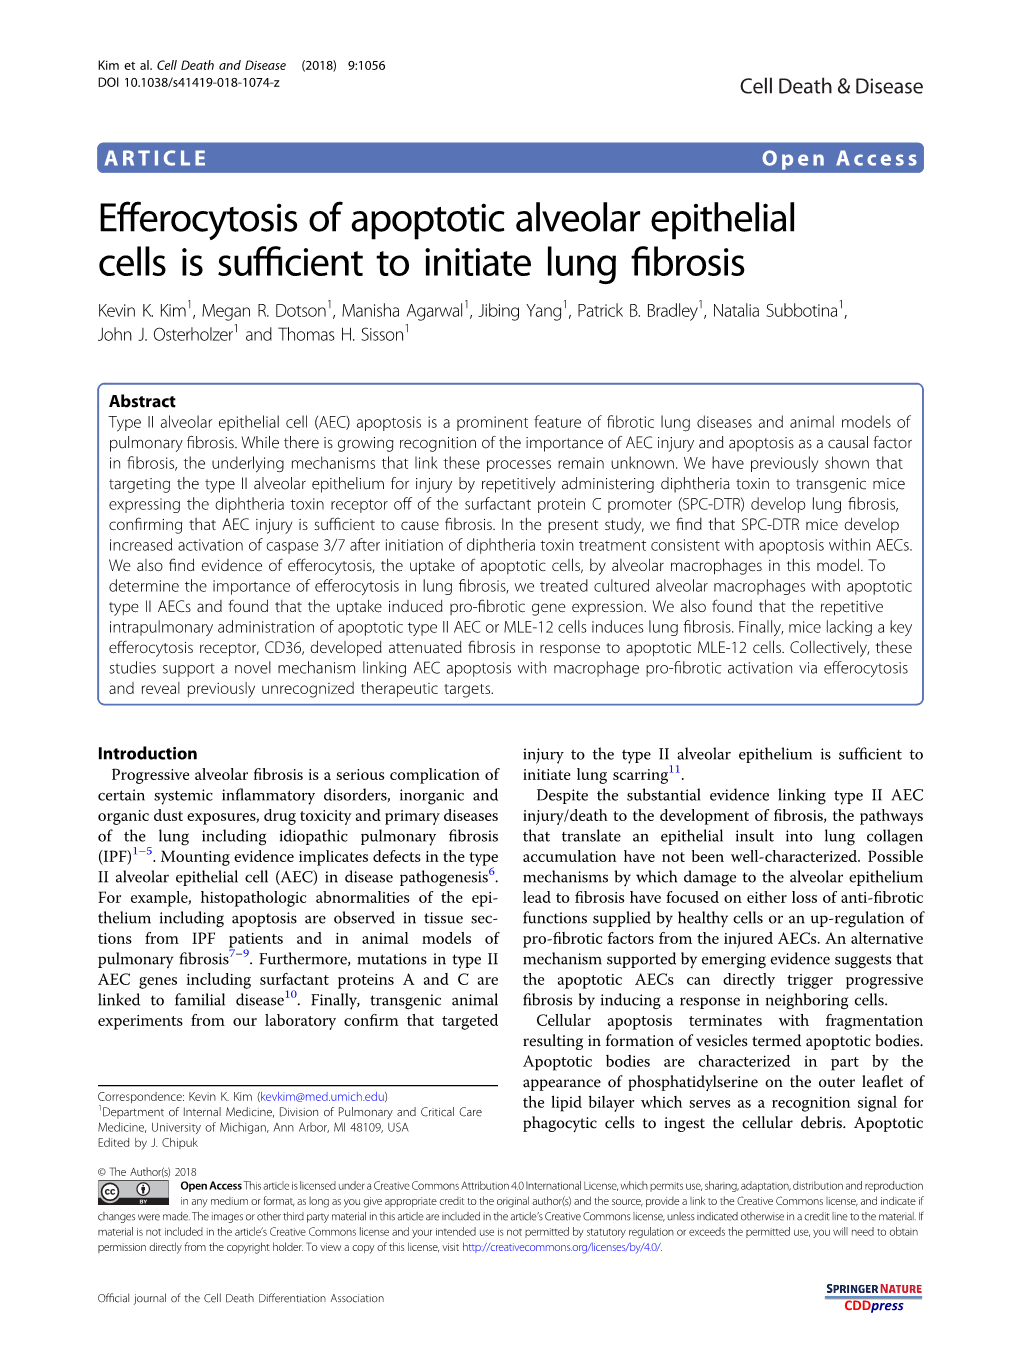 Efferocytosis of Apoptotic Alveolar Epithelial Cells Is Sufficient to Initiate